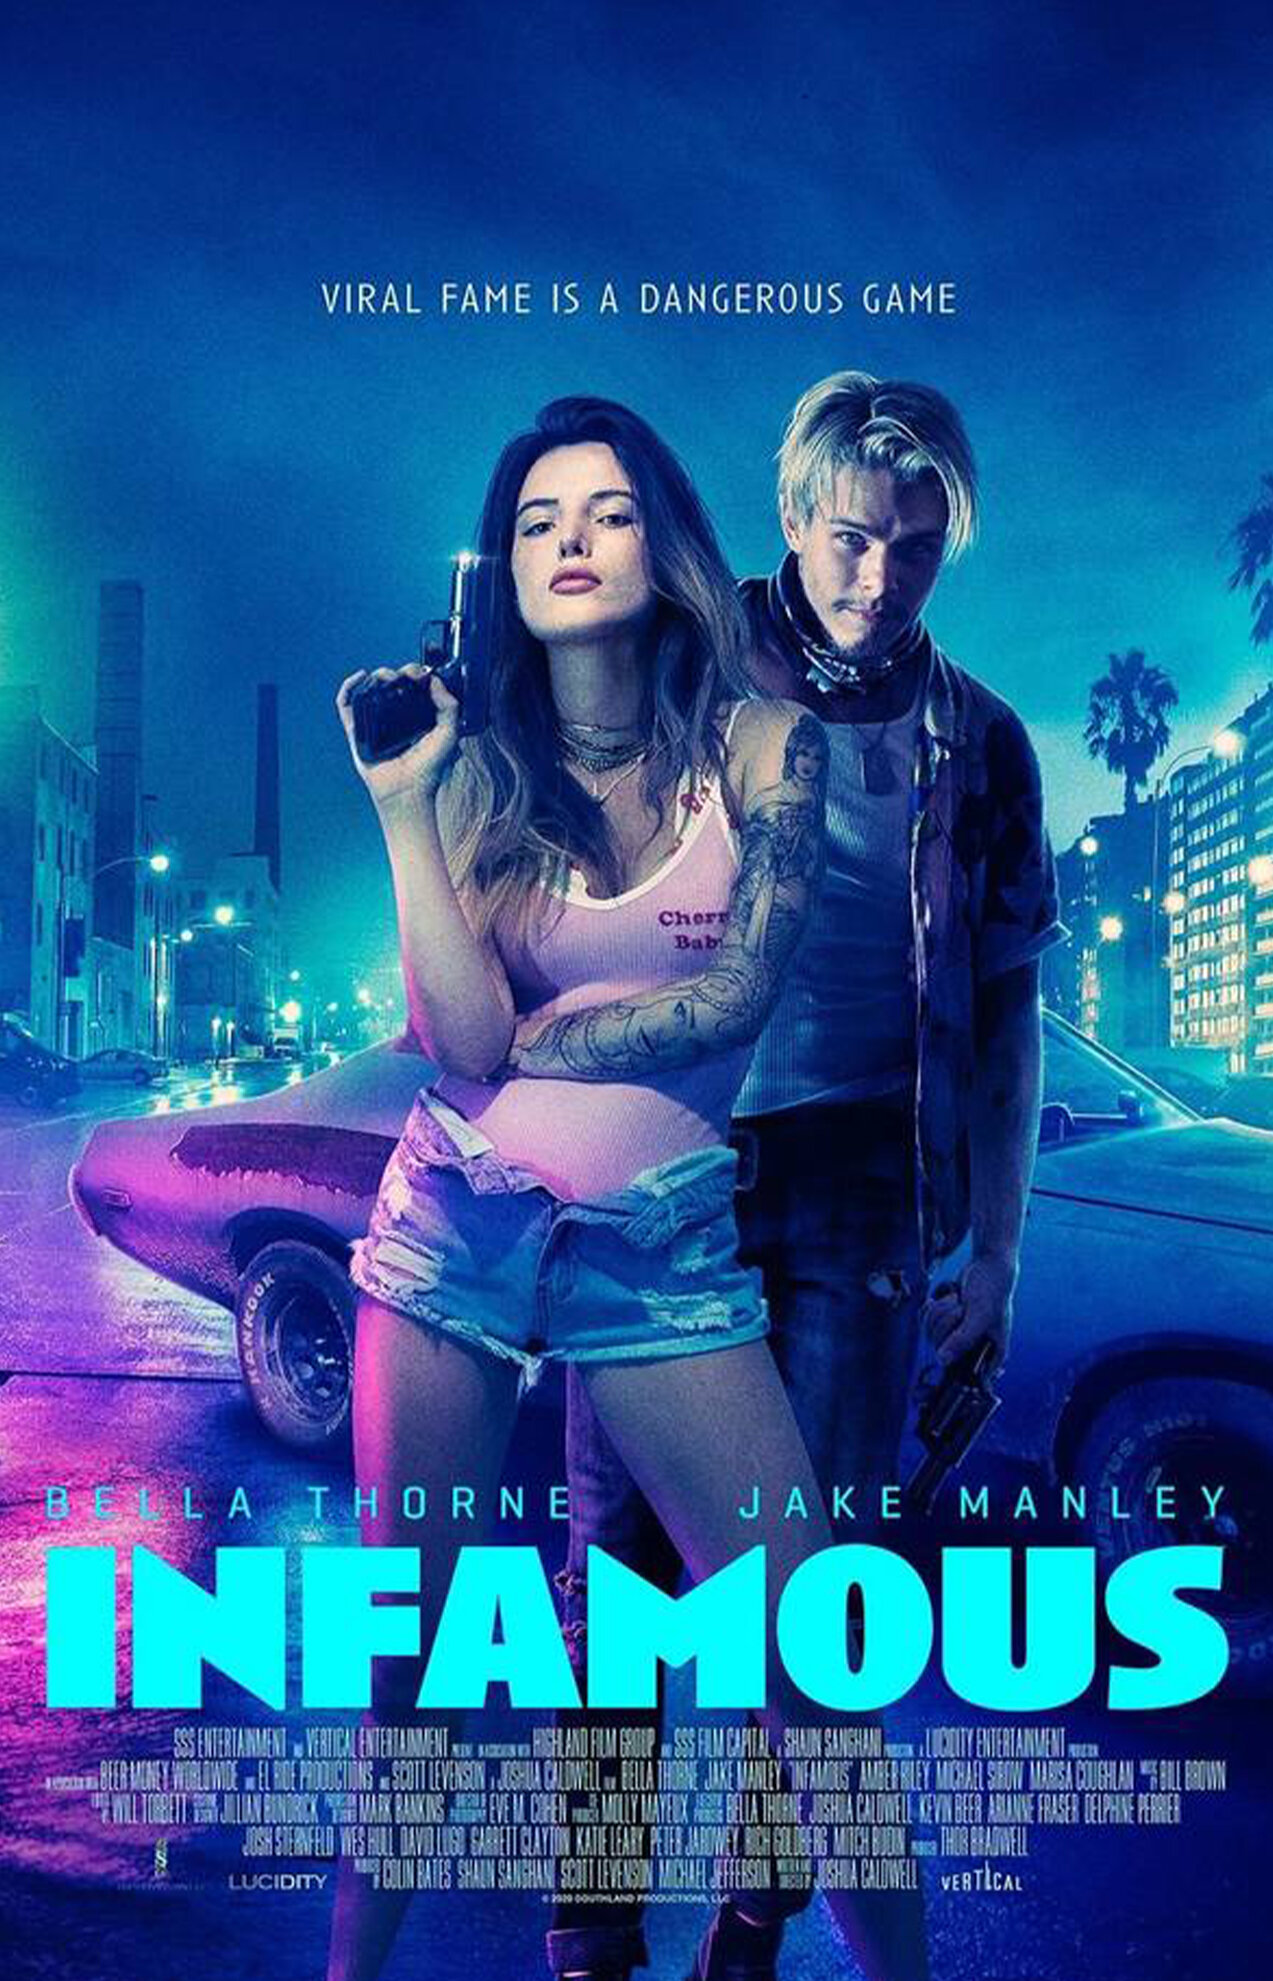 INFAMOUS with Bella Thorne